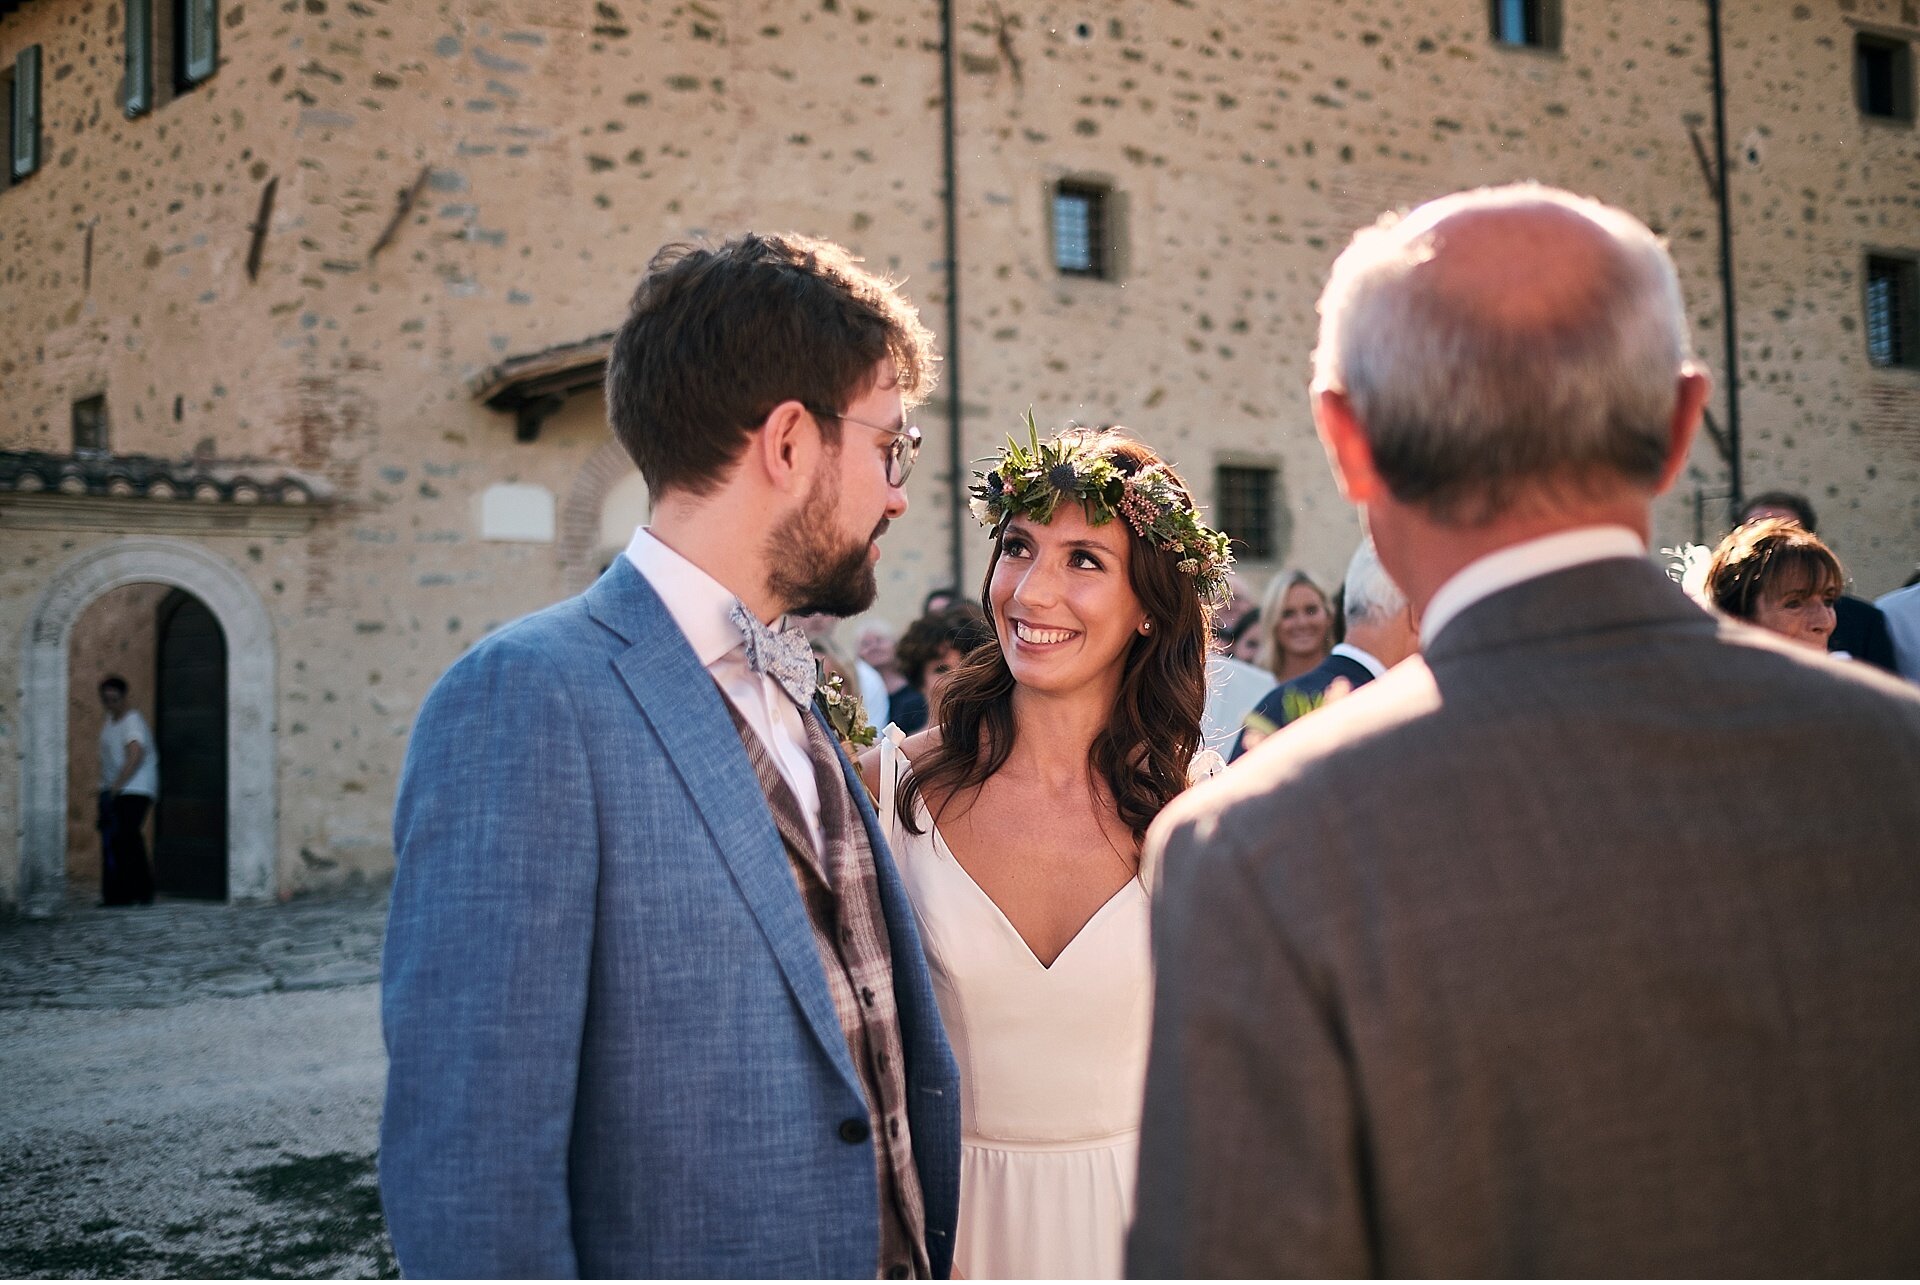  English wedding in Borgo Colognola, in the province of Perugia in Umbria. The newlyweds chose a symbolic ceremony in the castle garden and subsequent reception inside. The photo shoot was entrusted to the wedding photographer Matteo Castelli from Si